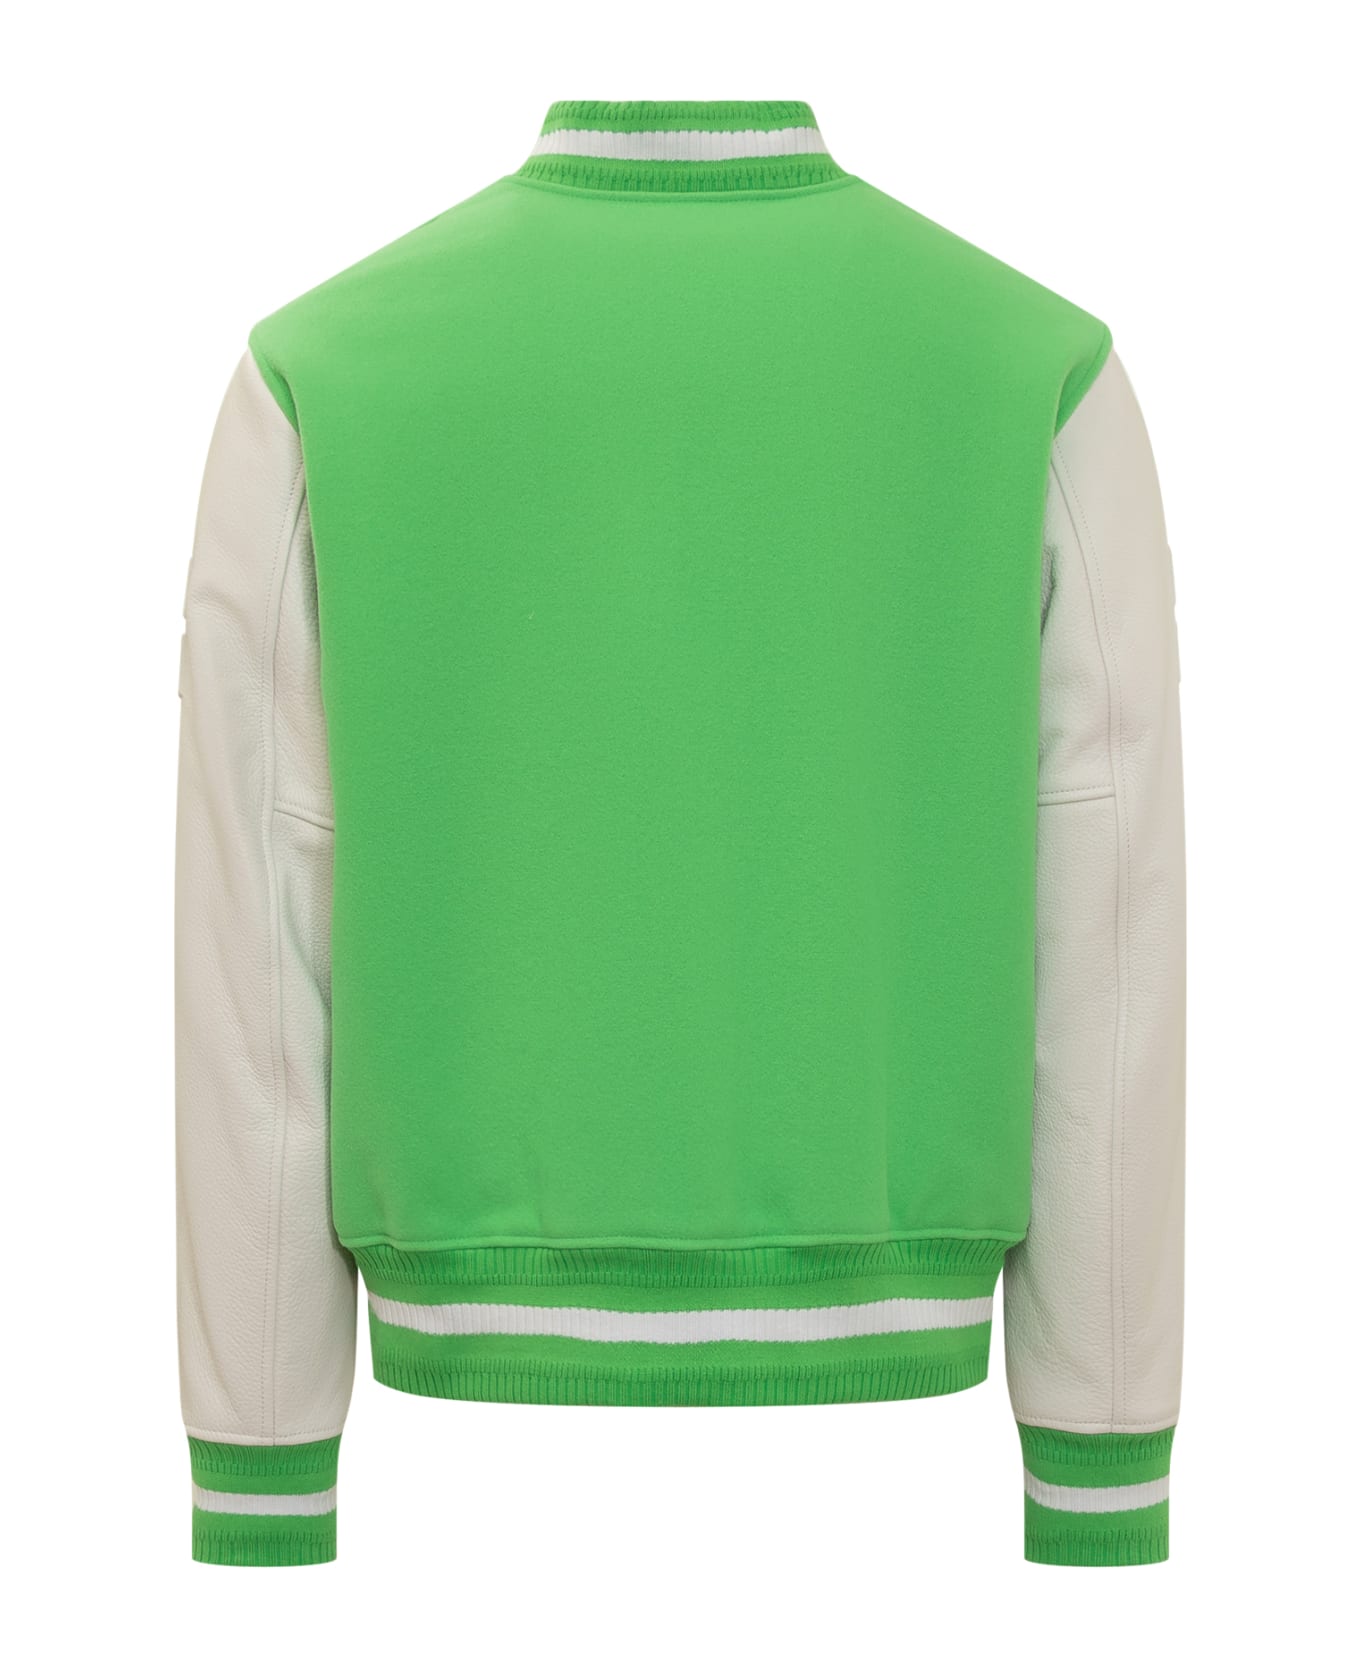 Givenchy Wool And Leather Bomber Jacket - BRIGHT GREEN ジャケット